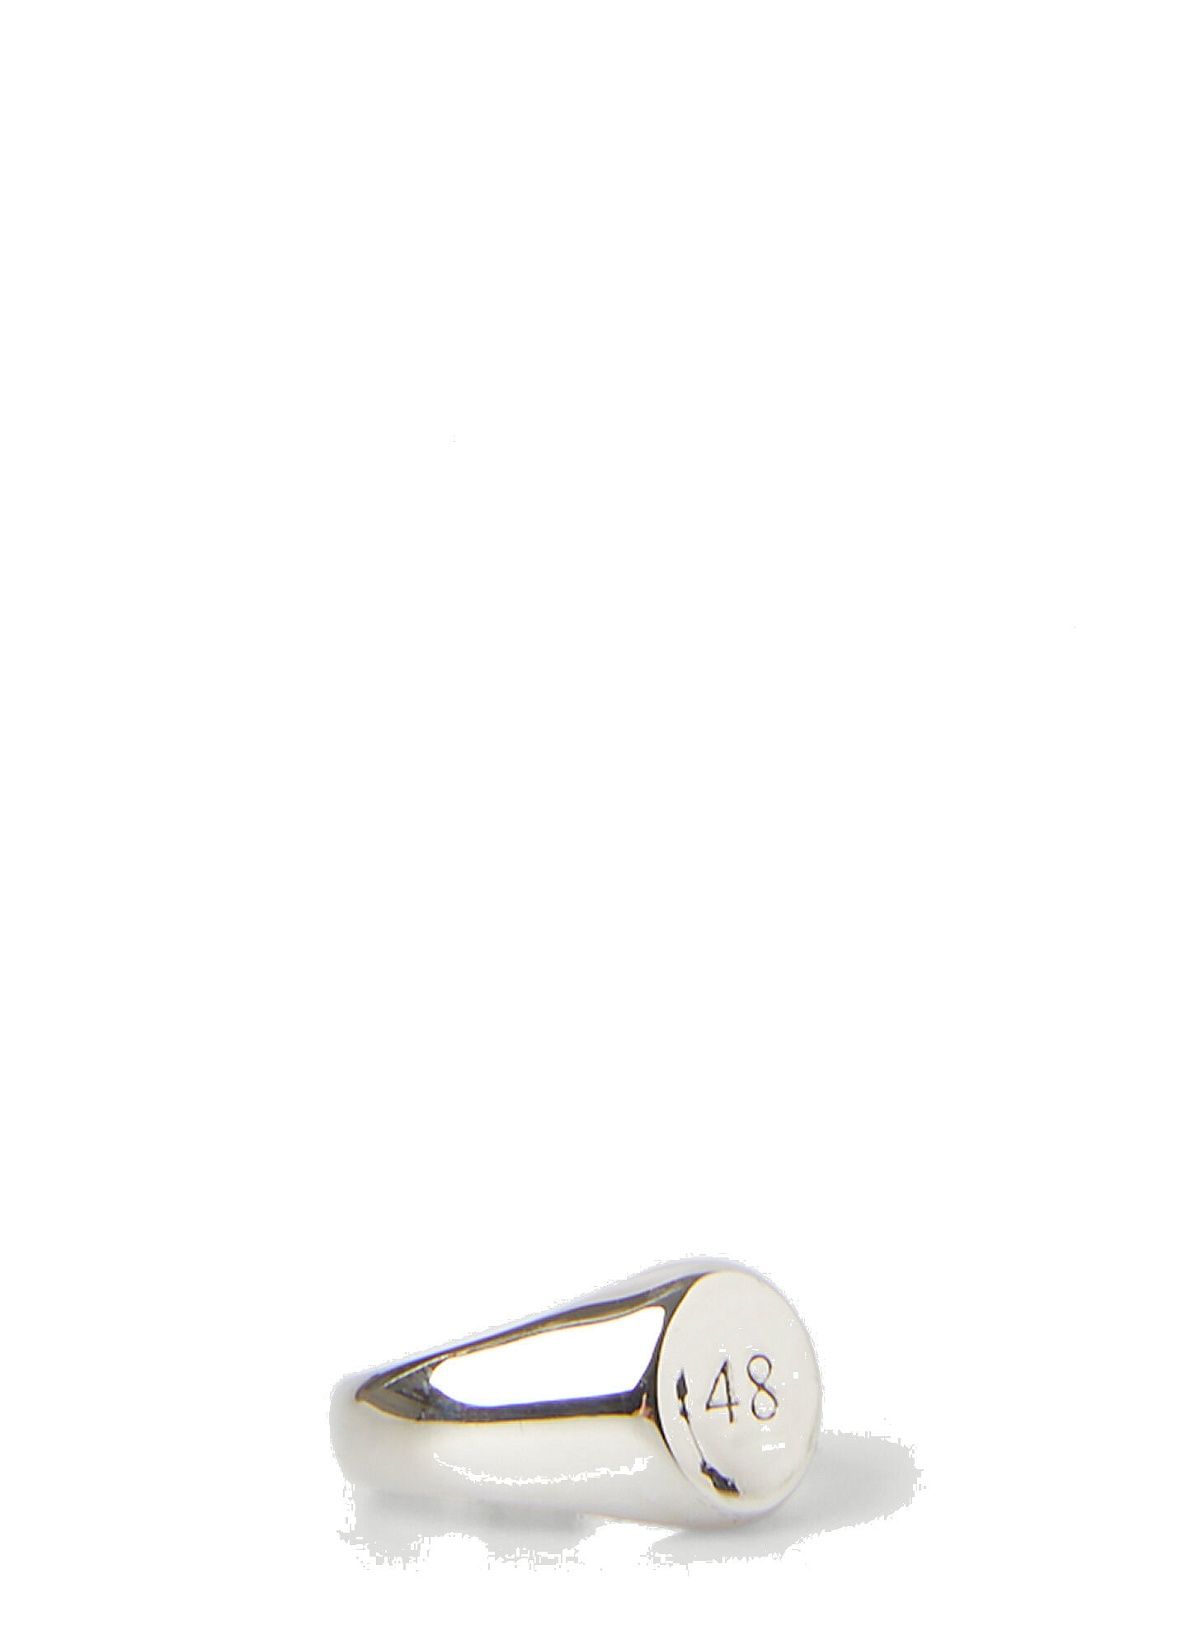 x Deewee USB Signet Ring in Silver D'heygere